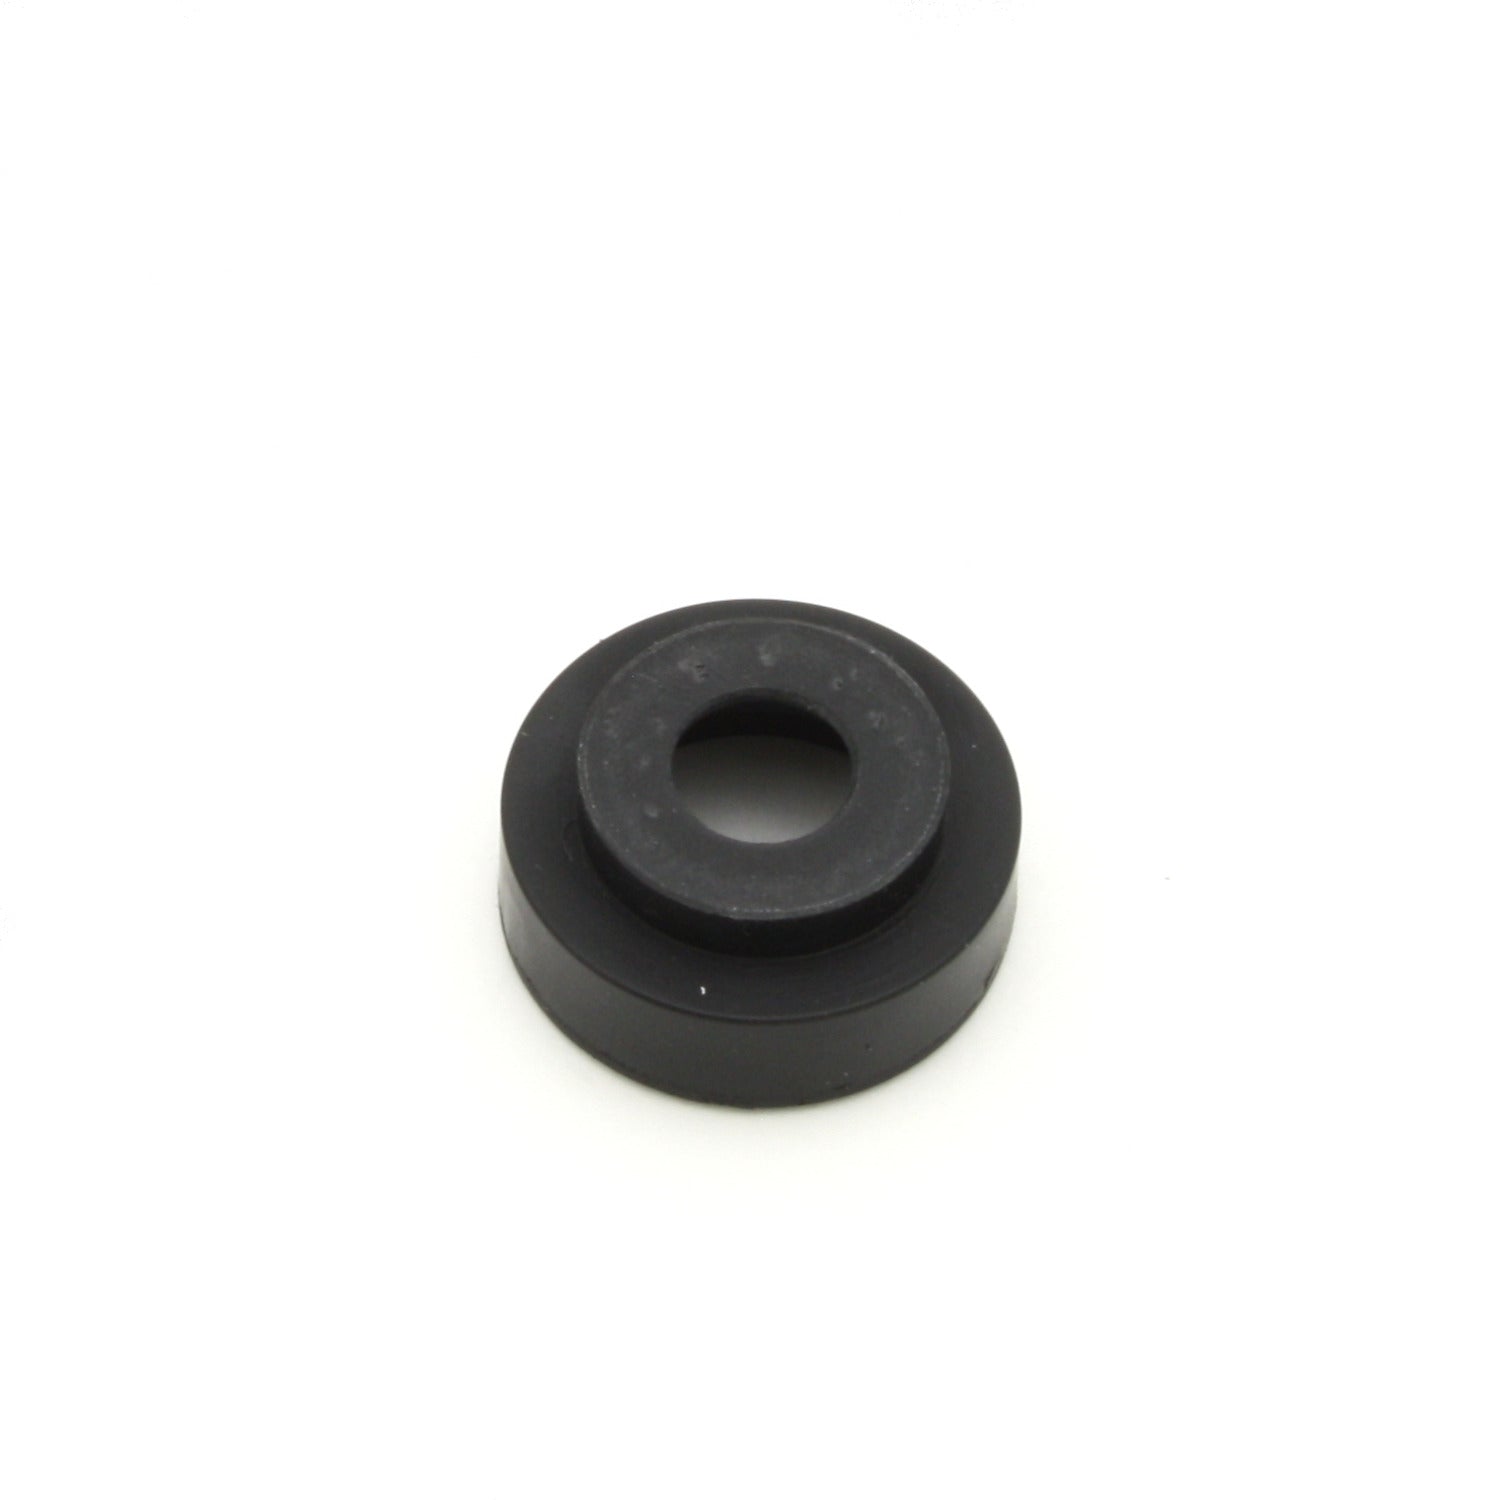 PerTronix WO-1413 Magnet Sleeve (only) for WO-141 Ignitor Kit